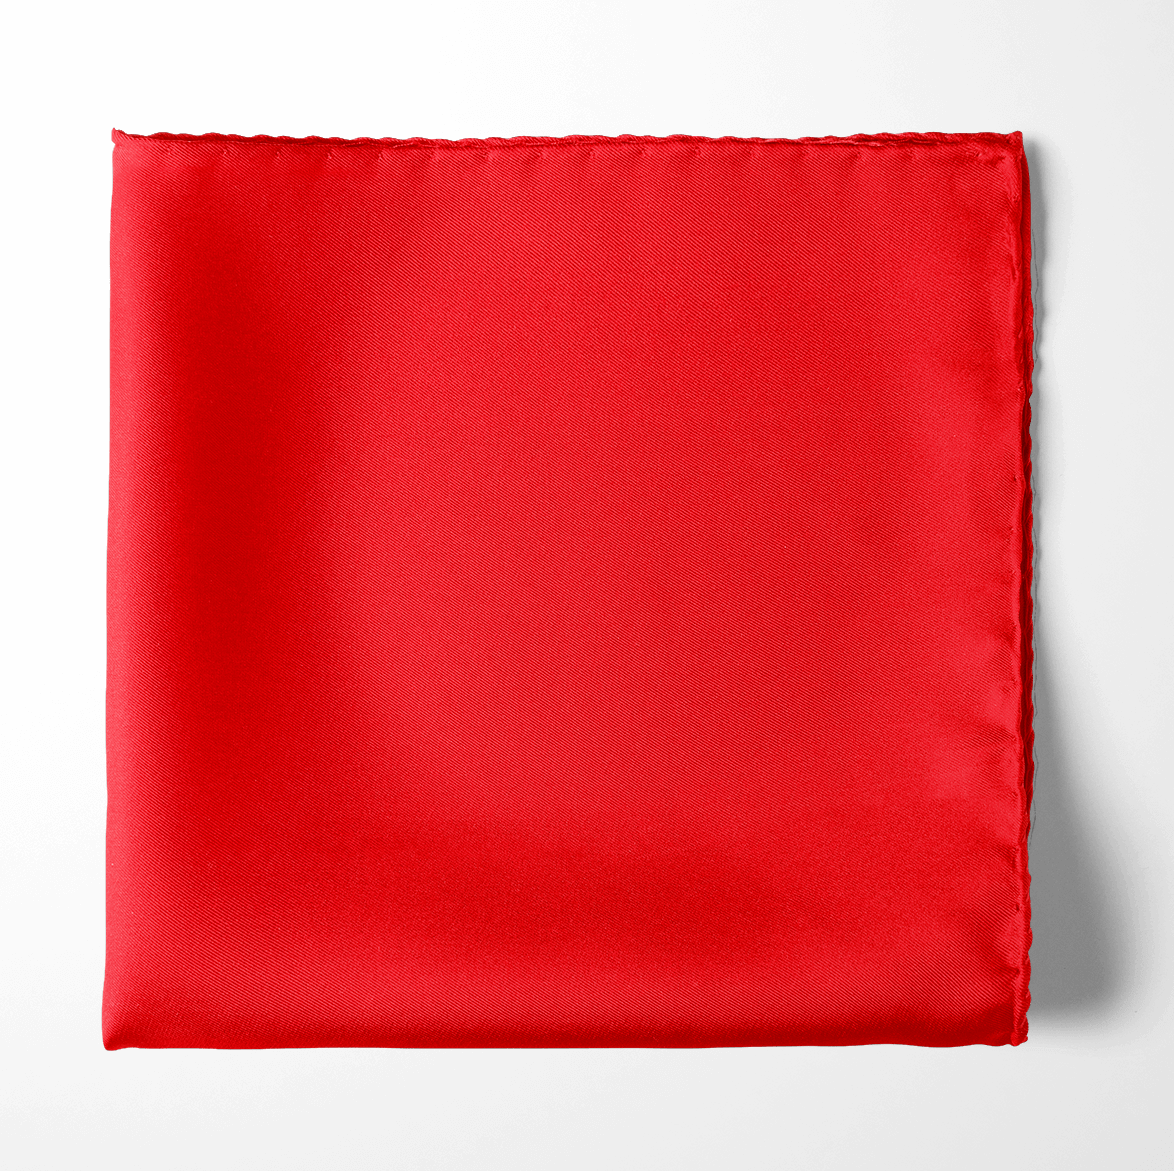 The Solid Red Silk pocket square